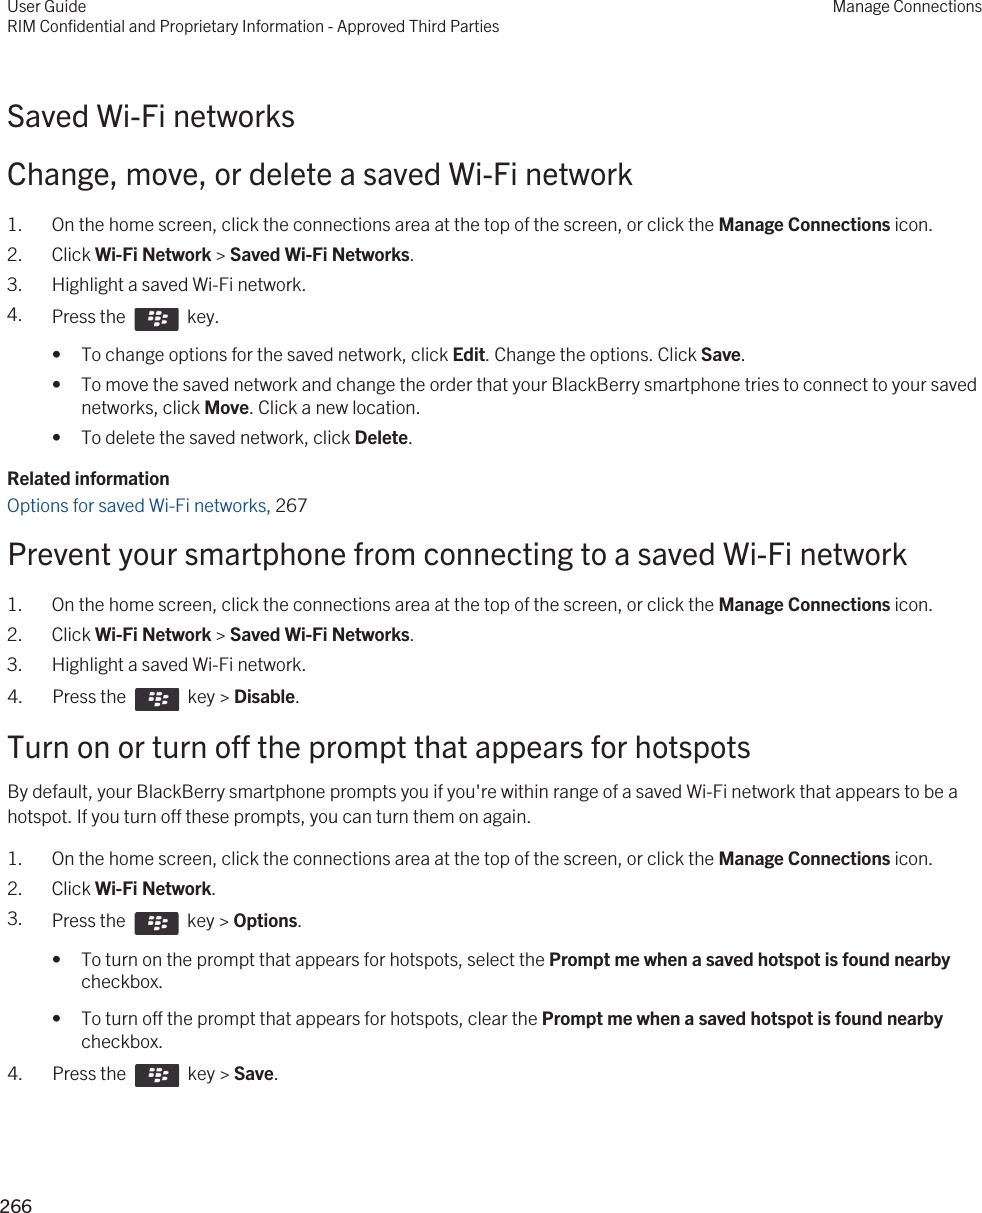 Saved Wi-Fi networksChange, move, or delete a saved Wi-Fi network1. On the home screen, click the connections area at the top of the screen, or click the Manage Connections icon.2. Click Wi-Fi Network &gt; Saved Wi-Fi Networks.3. Highlight a saved Wi-Fi network.4. Press the    key. • To change options for the saved network, click Edit. Change the options. Click Save.• To move the saved network and change the order that your BlackBerry smartphone tries to connect to your saved networks, click Move. Click a new location.• To delete the saved network, click Delete.Related informationOptions for saved Wi-Fi networks, 267Prevent your smartphone from connecting to a saved Wi-Fi network1. On the home screen, click the connections area at the top of the screen, or click the Manage Connections icon.2. Click Wi-Fi Network &gt; Saved Wi-Fi Networks.3. Highlight a saved Wi-Fi network.4.  Press the    key &gt; Disable. Turn on or turn off the prompt that appears for hotspotsBy default, your BlackBerry smartphone prompts you if you&apos;re within range of a saved Wi-Fi network that appears to be a hotspot. If you turn off these prompts, you can turn them on again.1. On the home screen, click the connections area at the top of the screen, or click the Manage Connections icon.2. Click Wi-Fi Network.3. Press the    key &gt; Options. • To turn on the prompt that appears for hotspots, select the Prompt me when a saved hotspot is found nearby checkbox.• To turn off the prompt that appears for hotspots, clear the Prompt me when a saved hotspot is found nearby checkbox.4.  Press the    key &gt; Save. User GuideRIM Confidential and Proprietary Information - Approved Third PartiesManage Connections266 